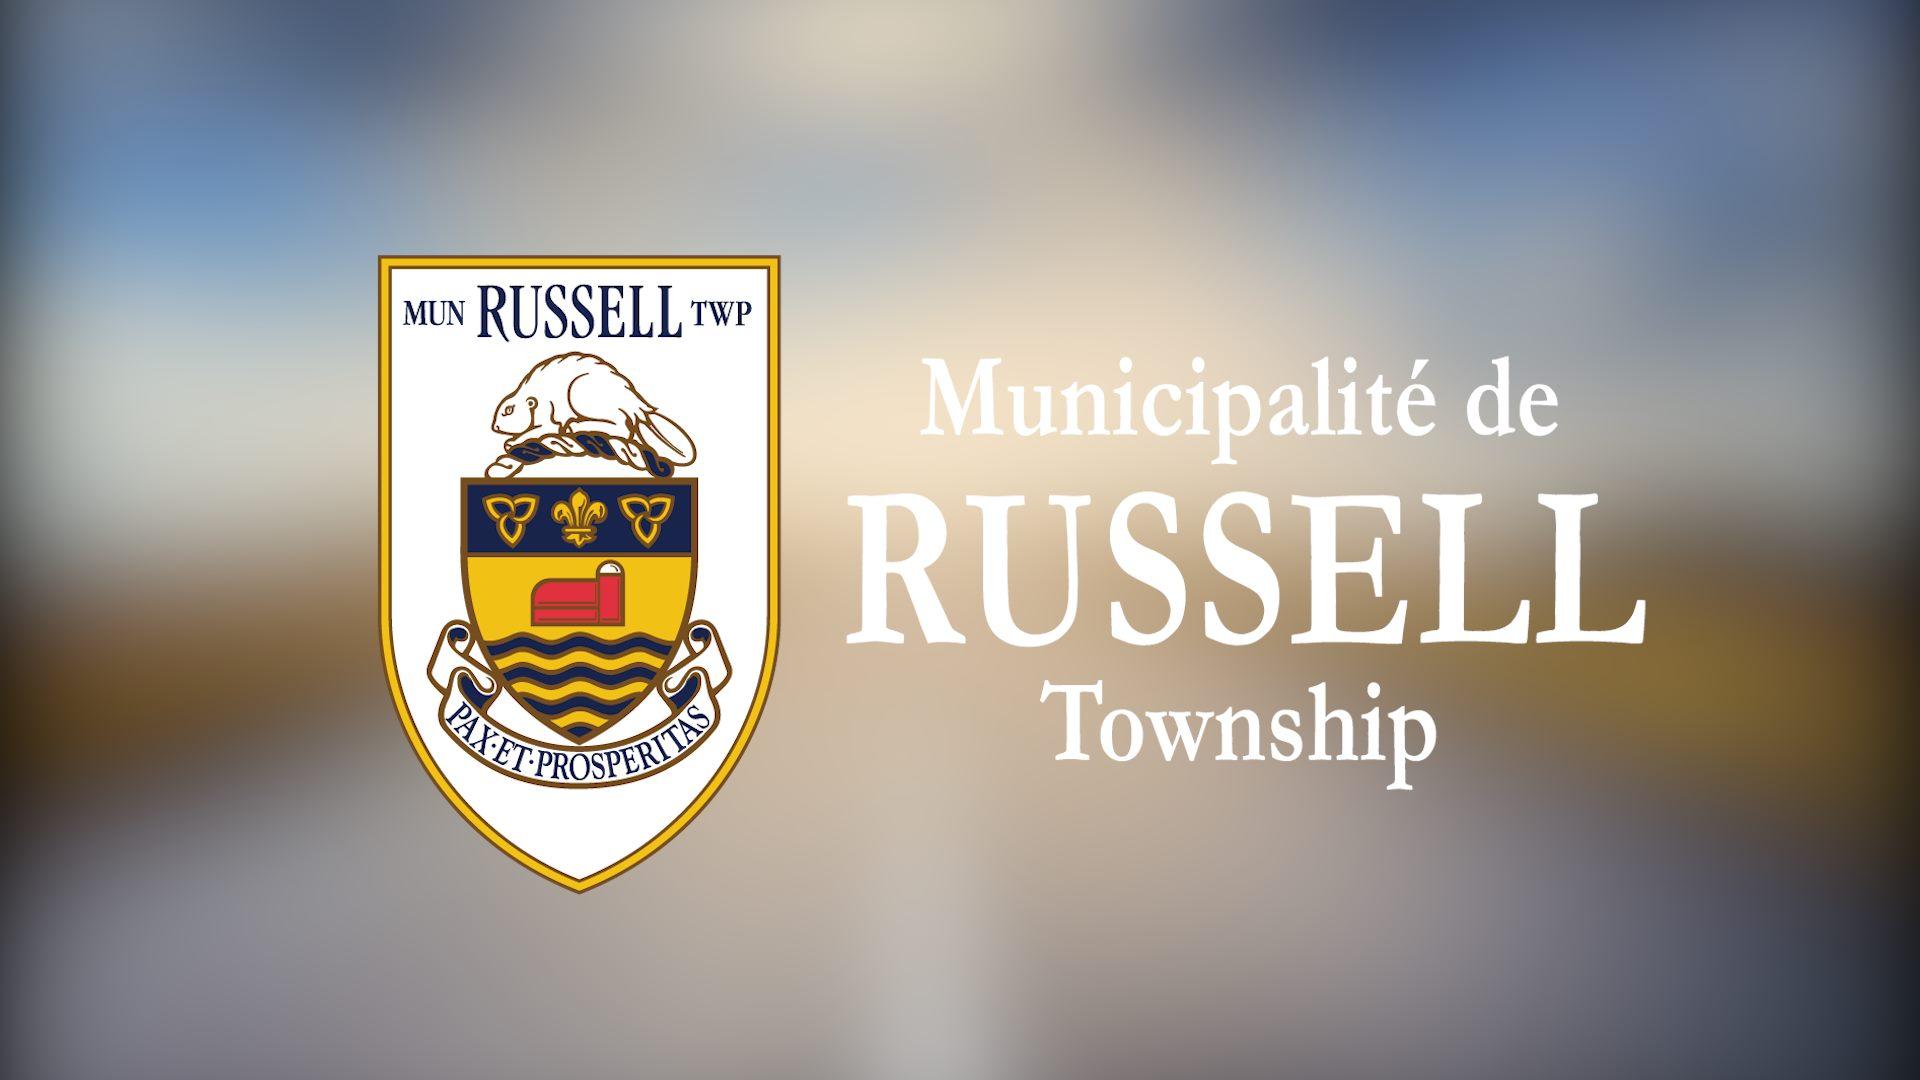 Russell mayor proposes rededicating name of township